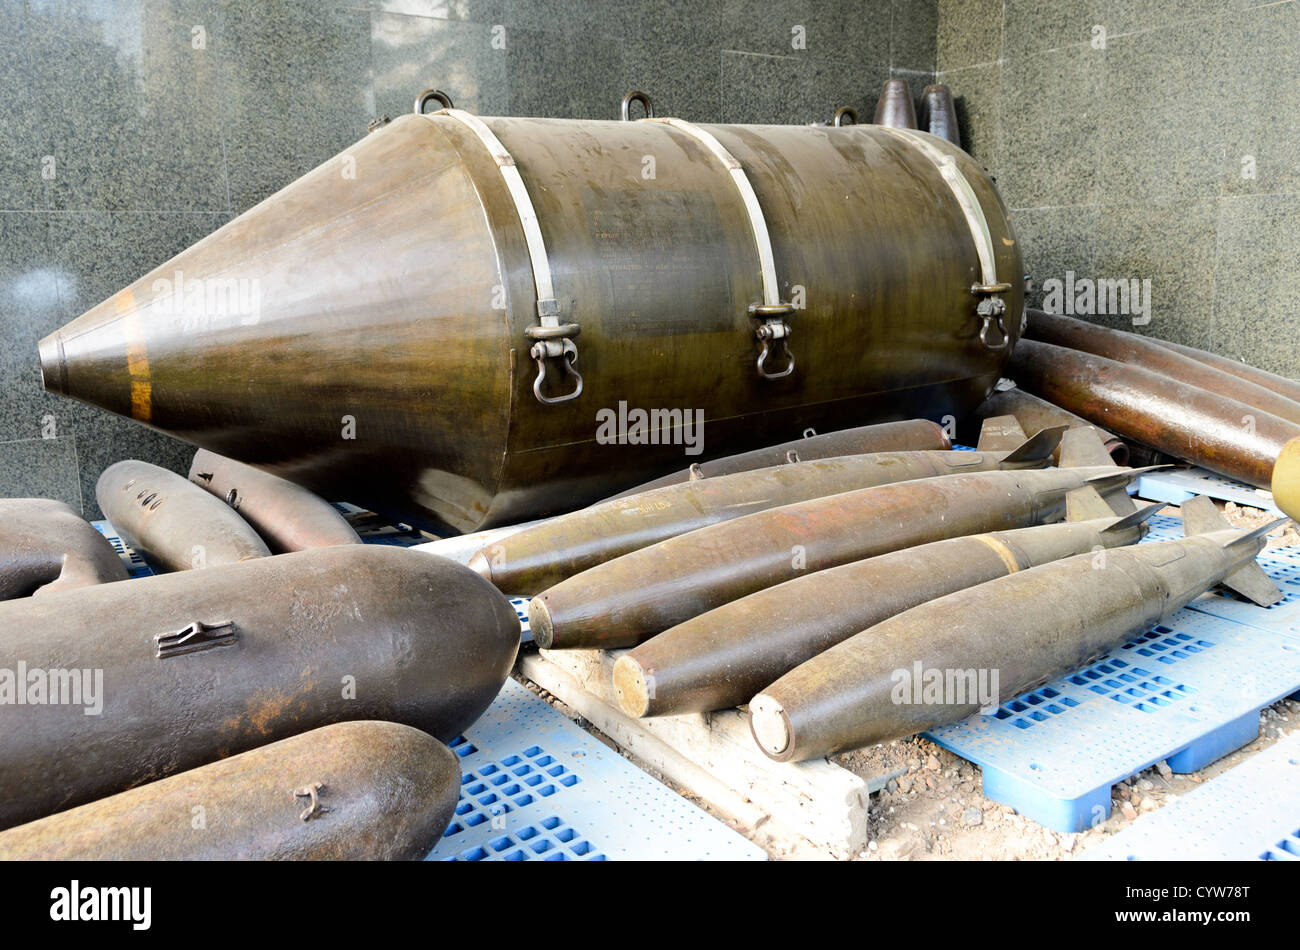 HO CHI MINH CITY, Vietnam - Large unexploded ordnance of bombs and missiles on display at the War Remnants Museum in Ho Chi Minh City (Saigon), Vietnam. Stock Photo